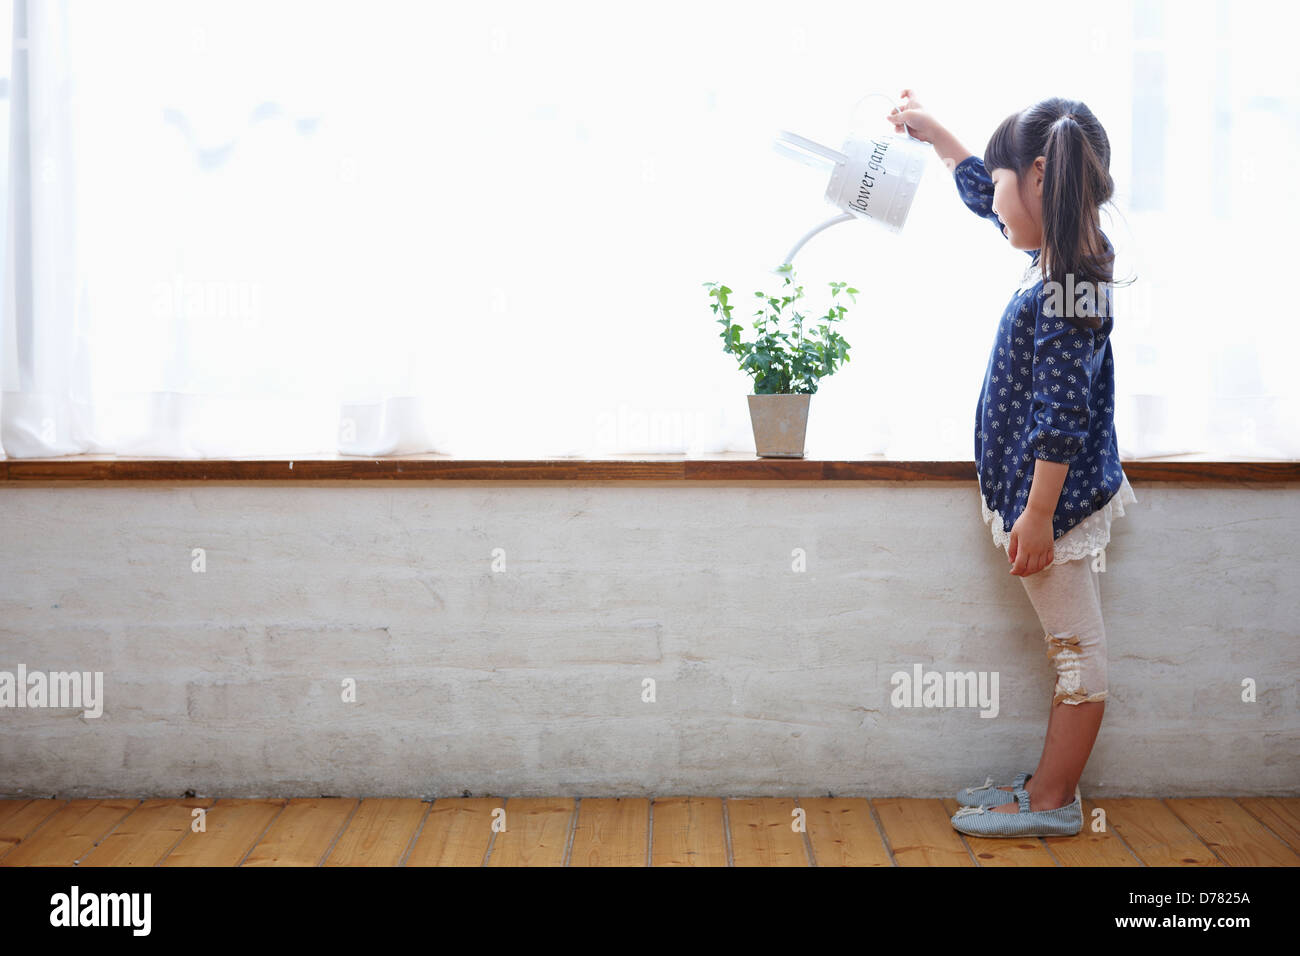 a girl watering a plant in a vase Stock Photo